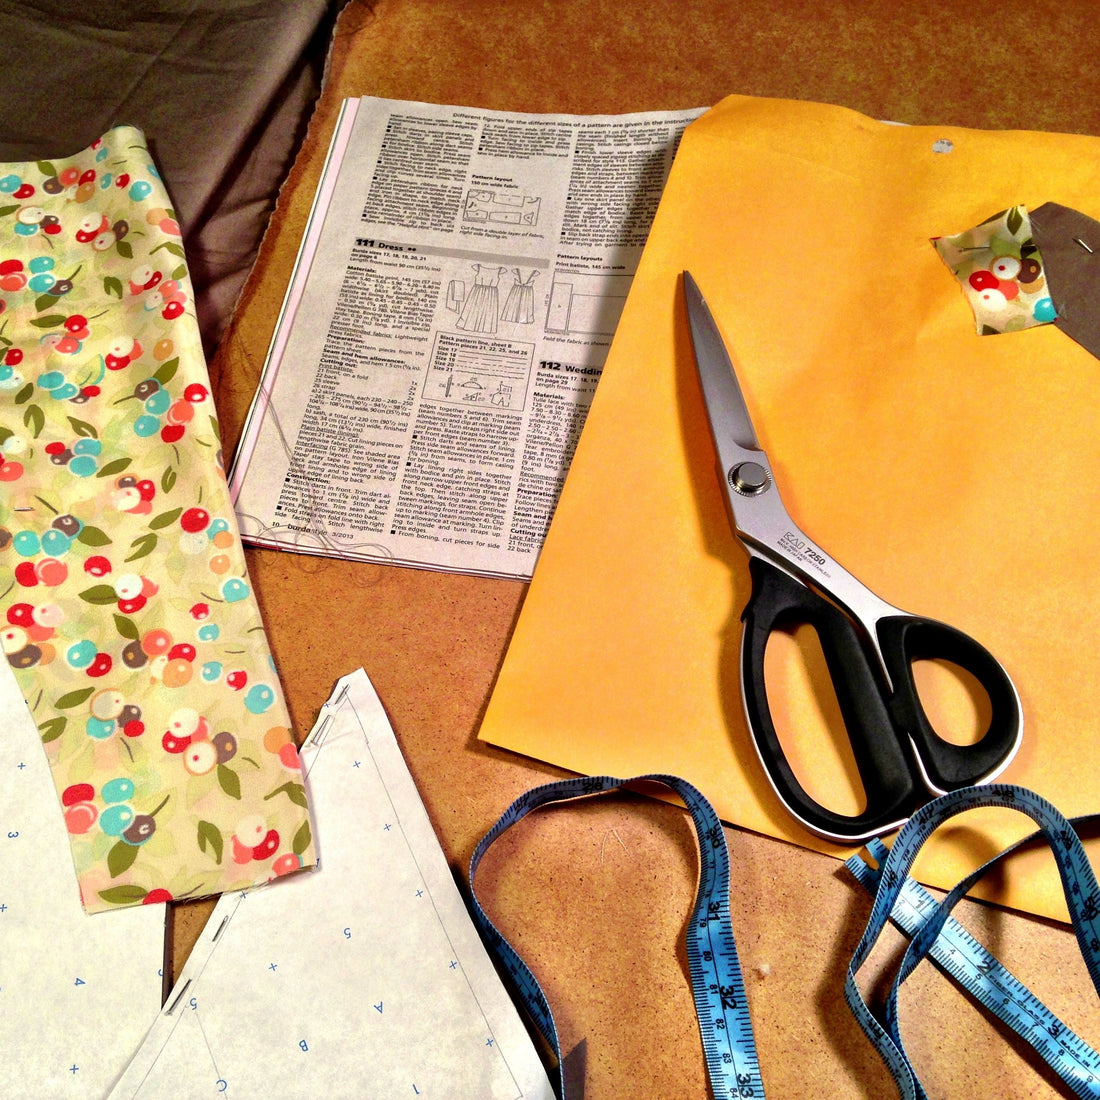 What's on the sewing table